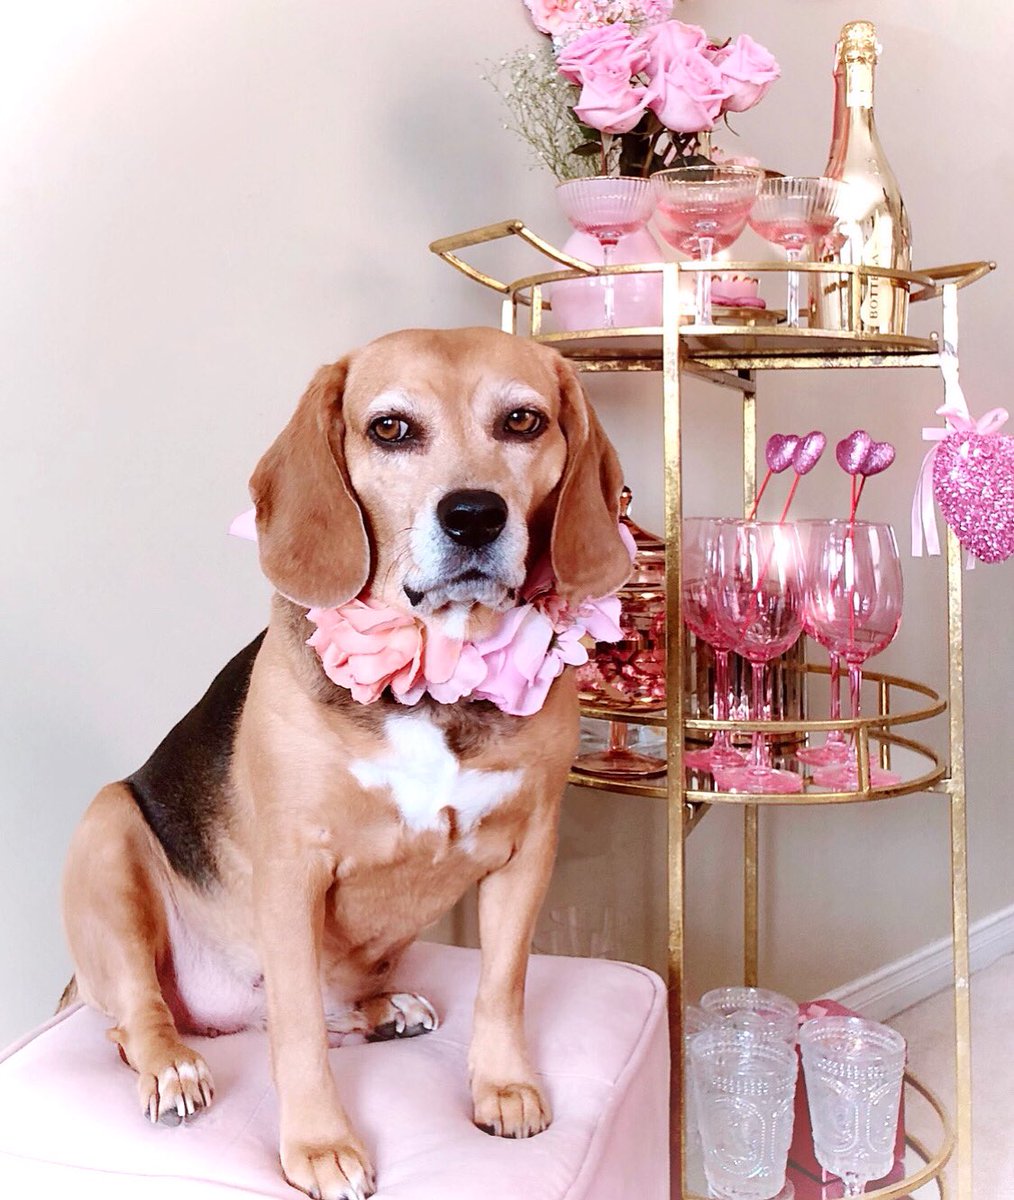 RT @BeagleTopazthe: 🙄Enough with the photos already Mom, it’s Friday, where’s my Pawtini!?🍸🐾
.
.
.
@BHG @goodhousemag #bhgpets #ghsealofcute @beaglefacts #beaglefact #funnydog #cheerstotheweekend #barcart #beagle #pinklove